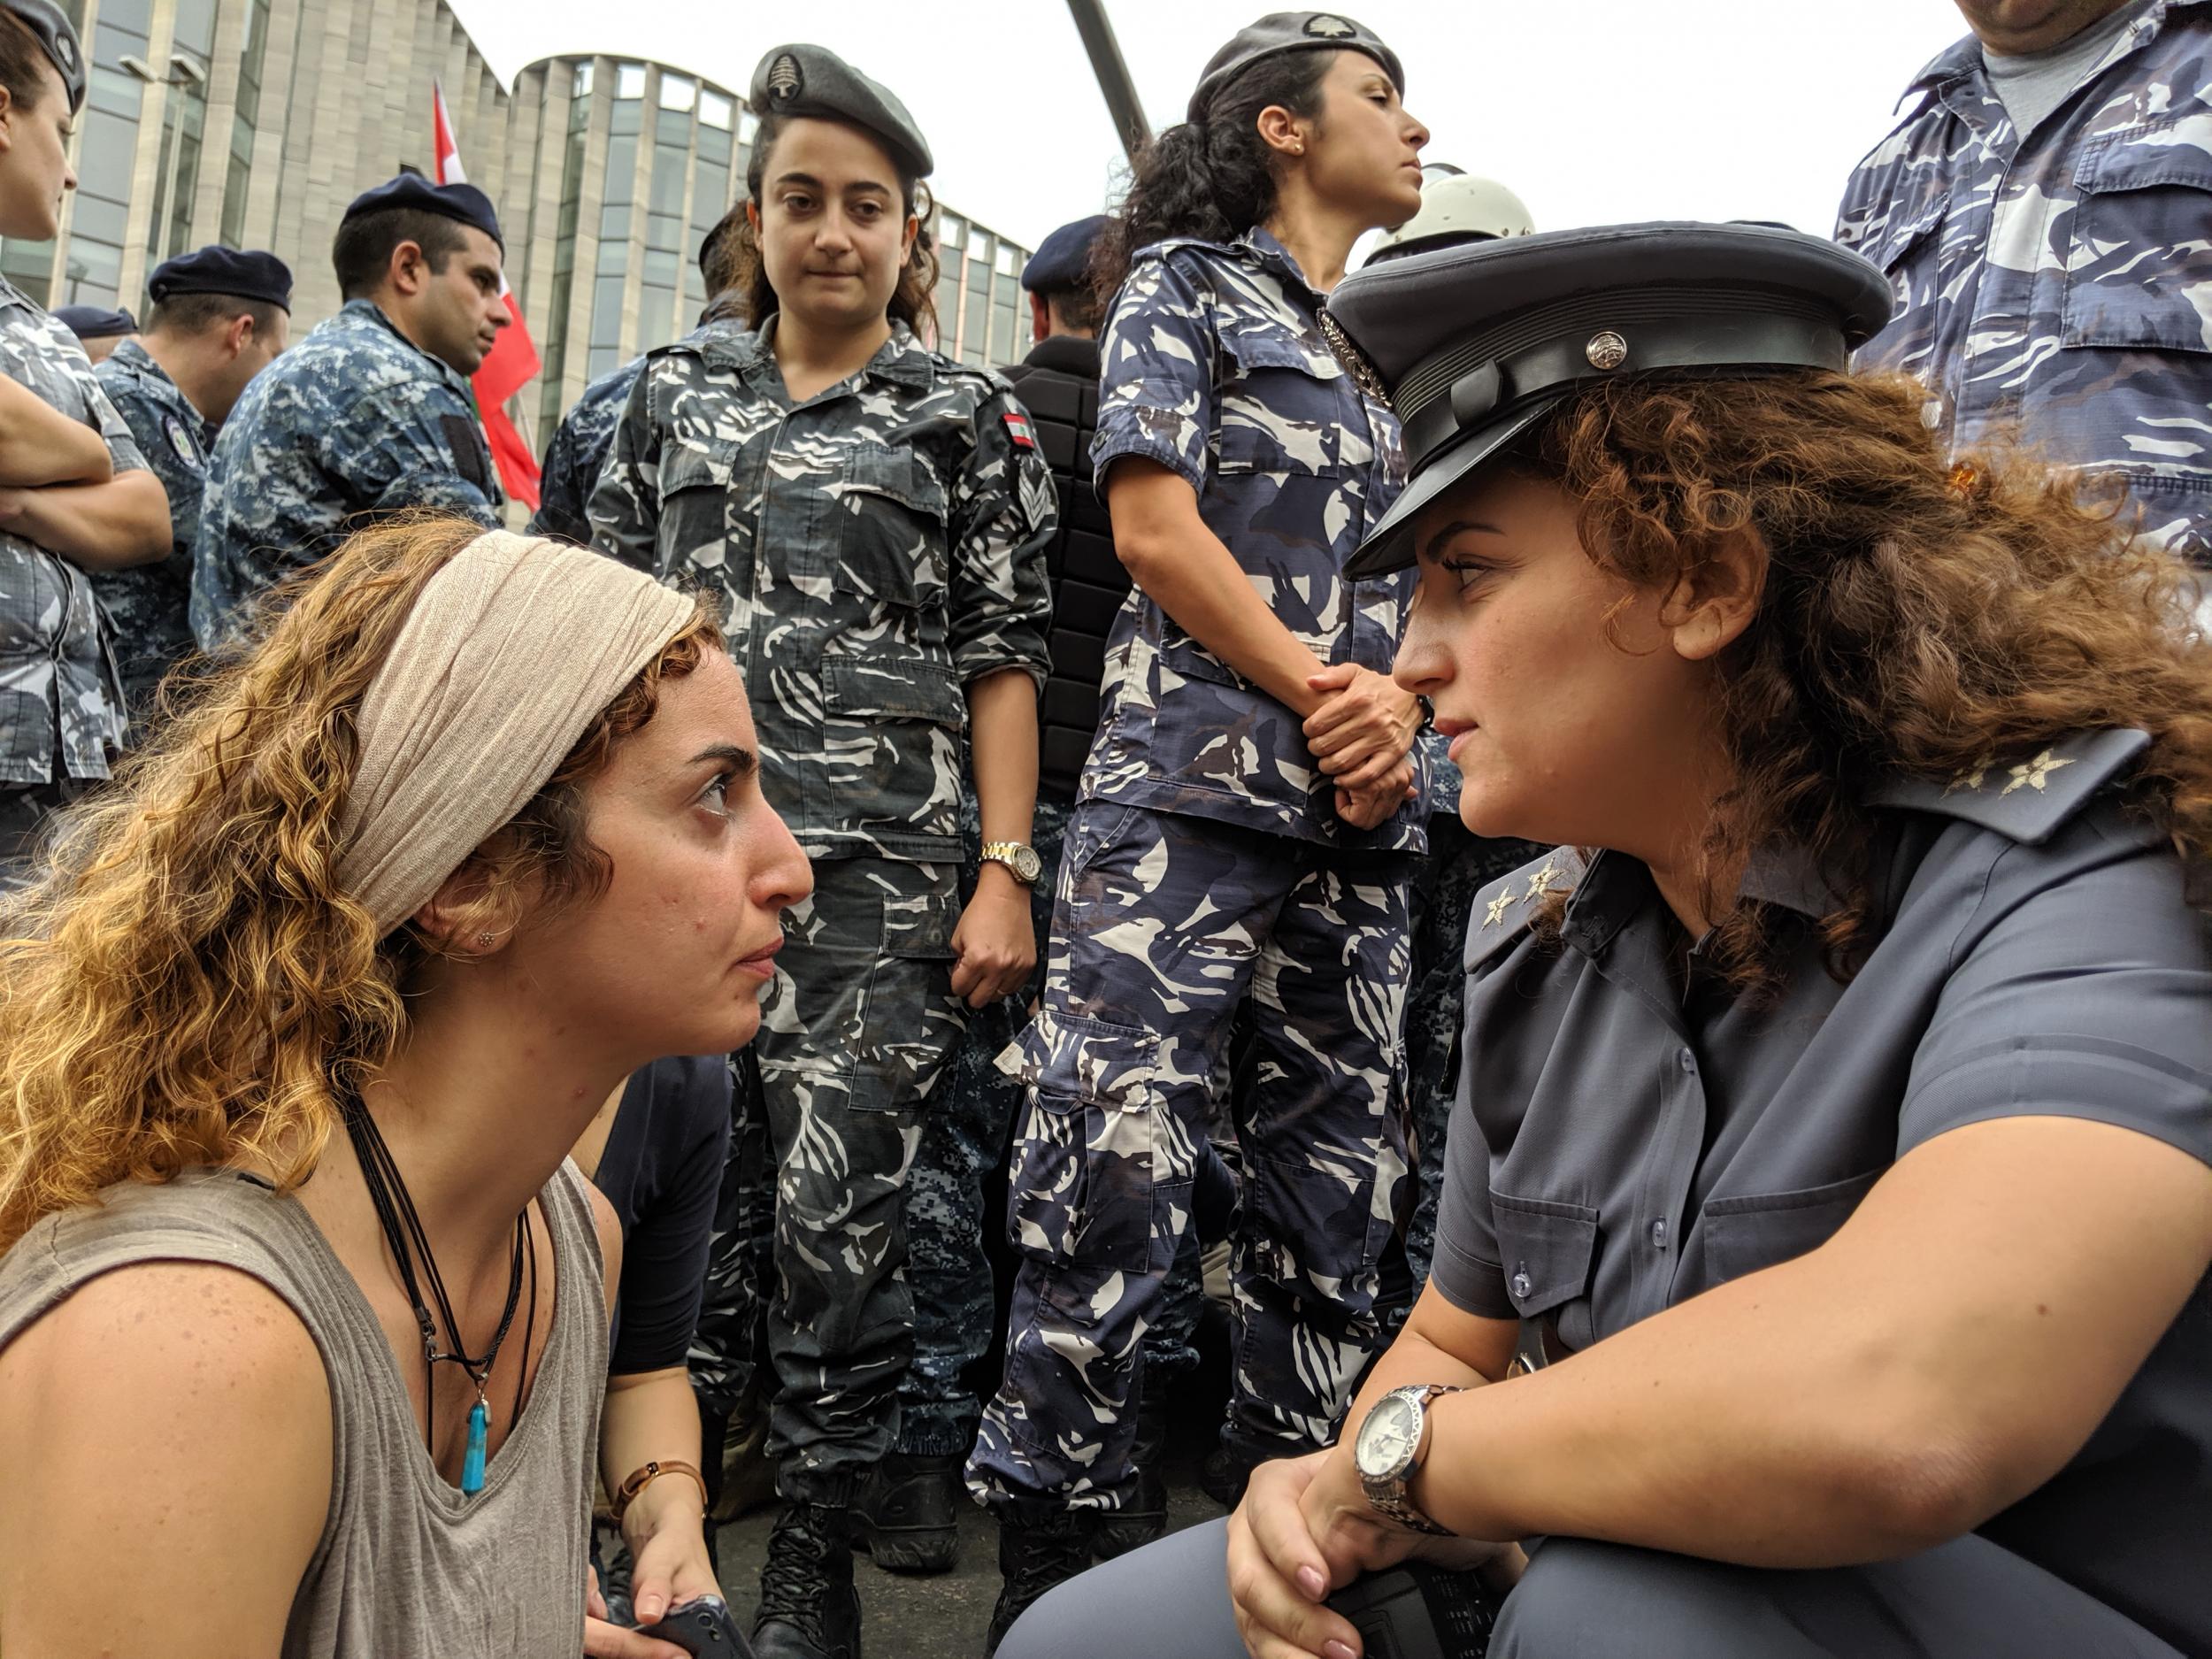 A protester faces off with a police officer at a roadblock sit-in in Beirut, Lebanon